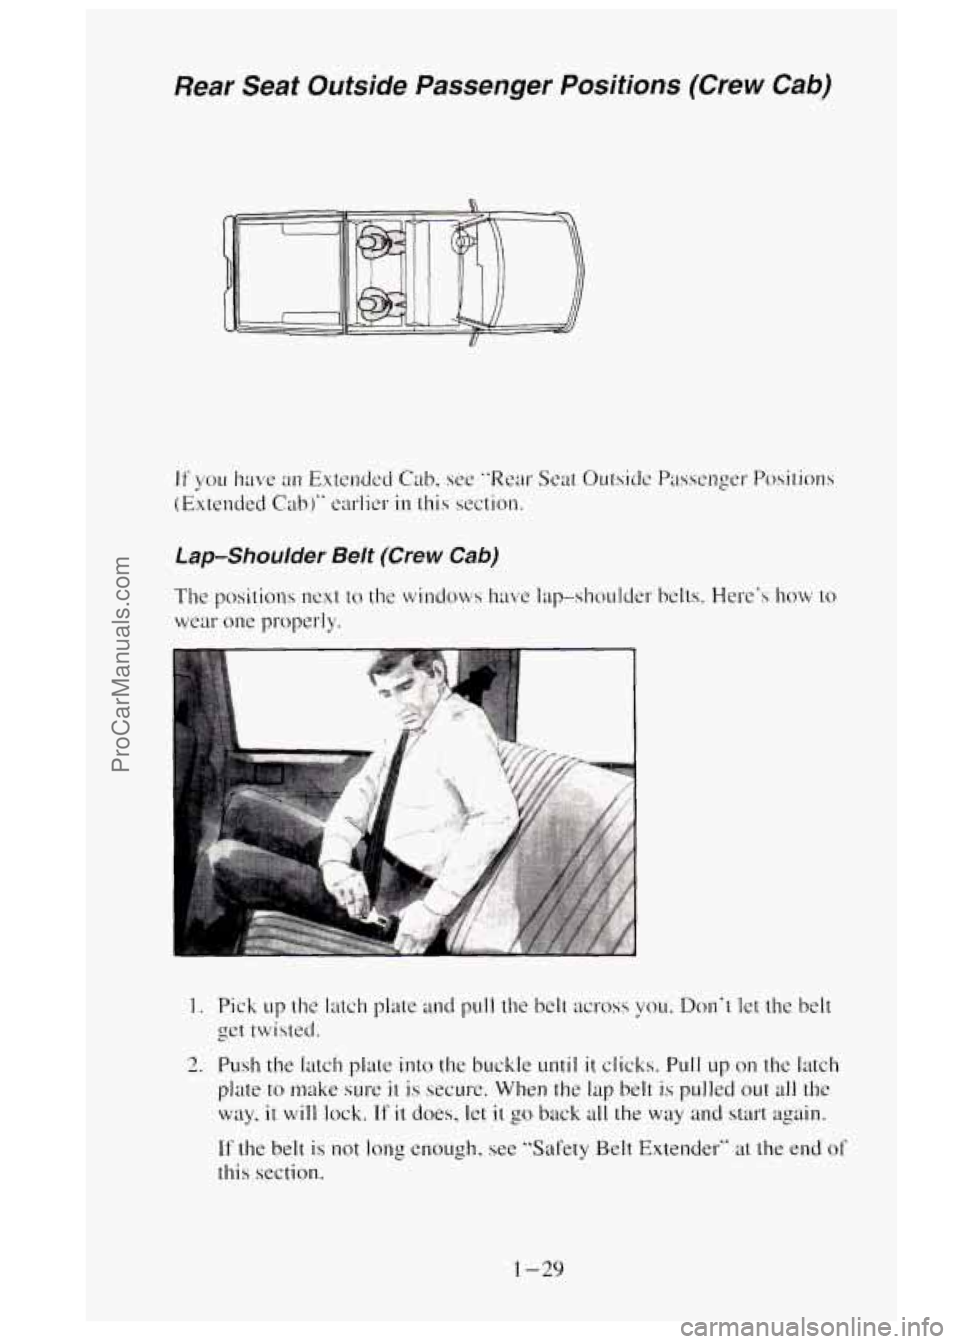 GMC SIERRA 1995  Owners Manual Rear Seat Outside  Passenger  Positions  (Crew  Cab) 
If you have an Extended Cab, see "Rex Seat Outside Passenger  Positions 
(Extended 
Cab)" earlier in this  section. 
Lap-Shoulder  Belt  (Crew Cab